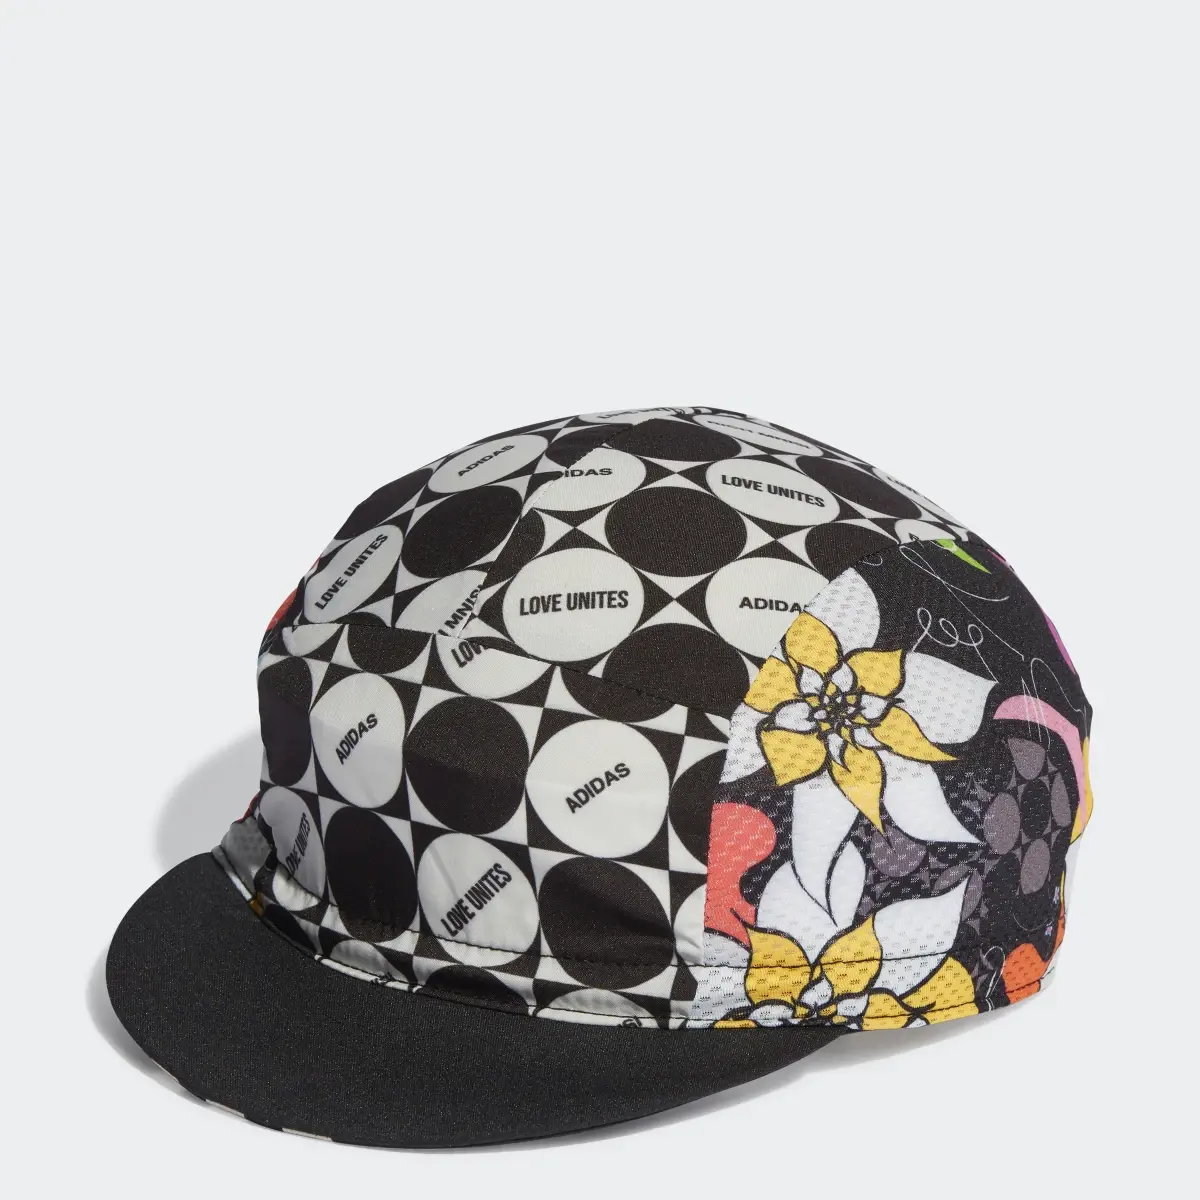 Adidas Rich Mnisi x The Cycling Cap. 1